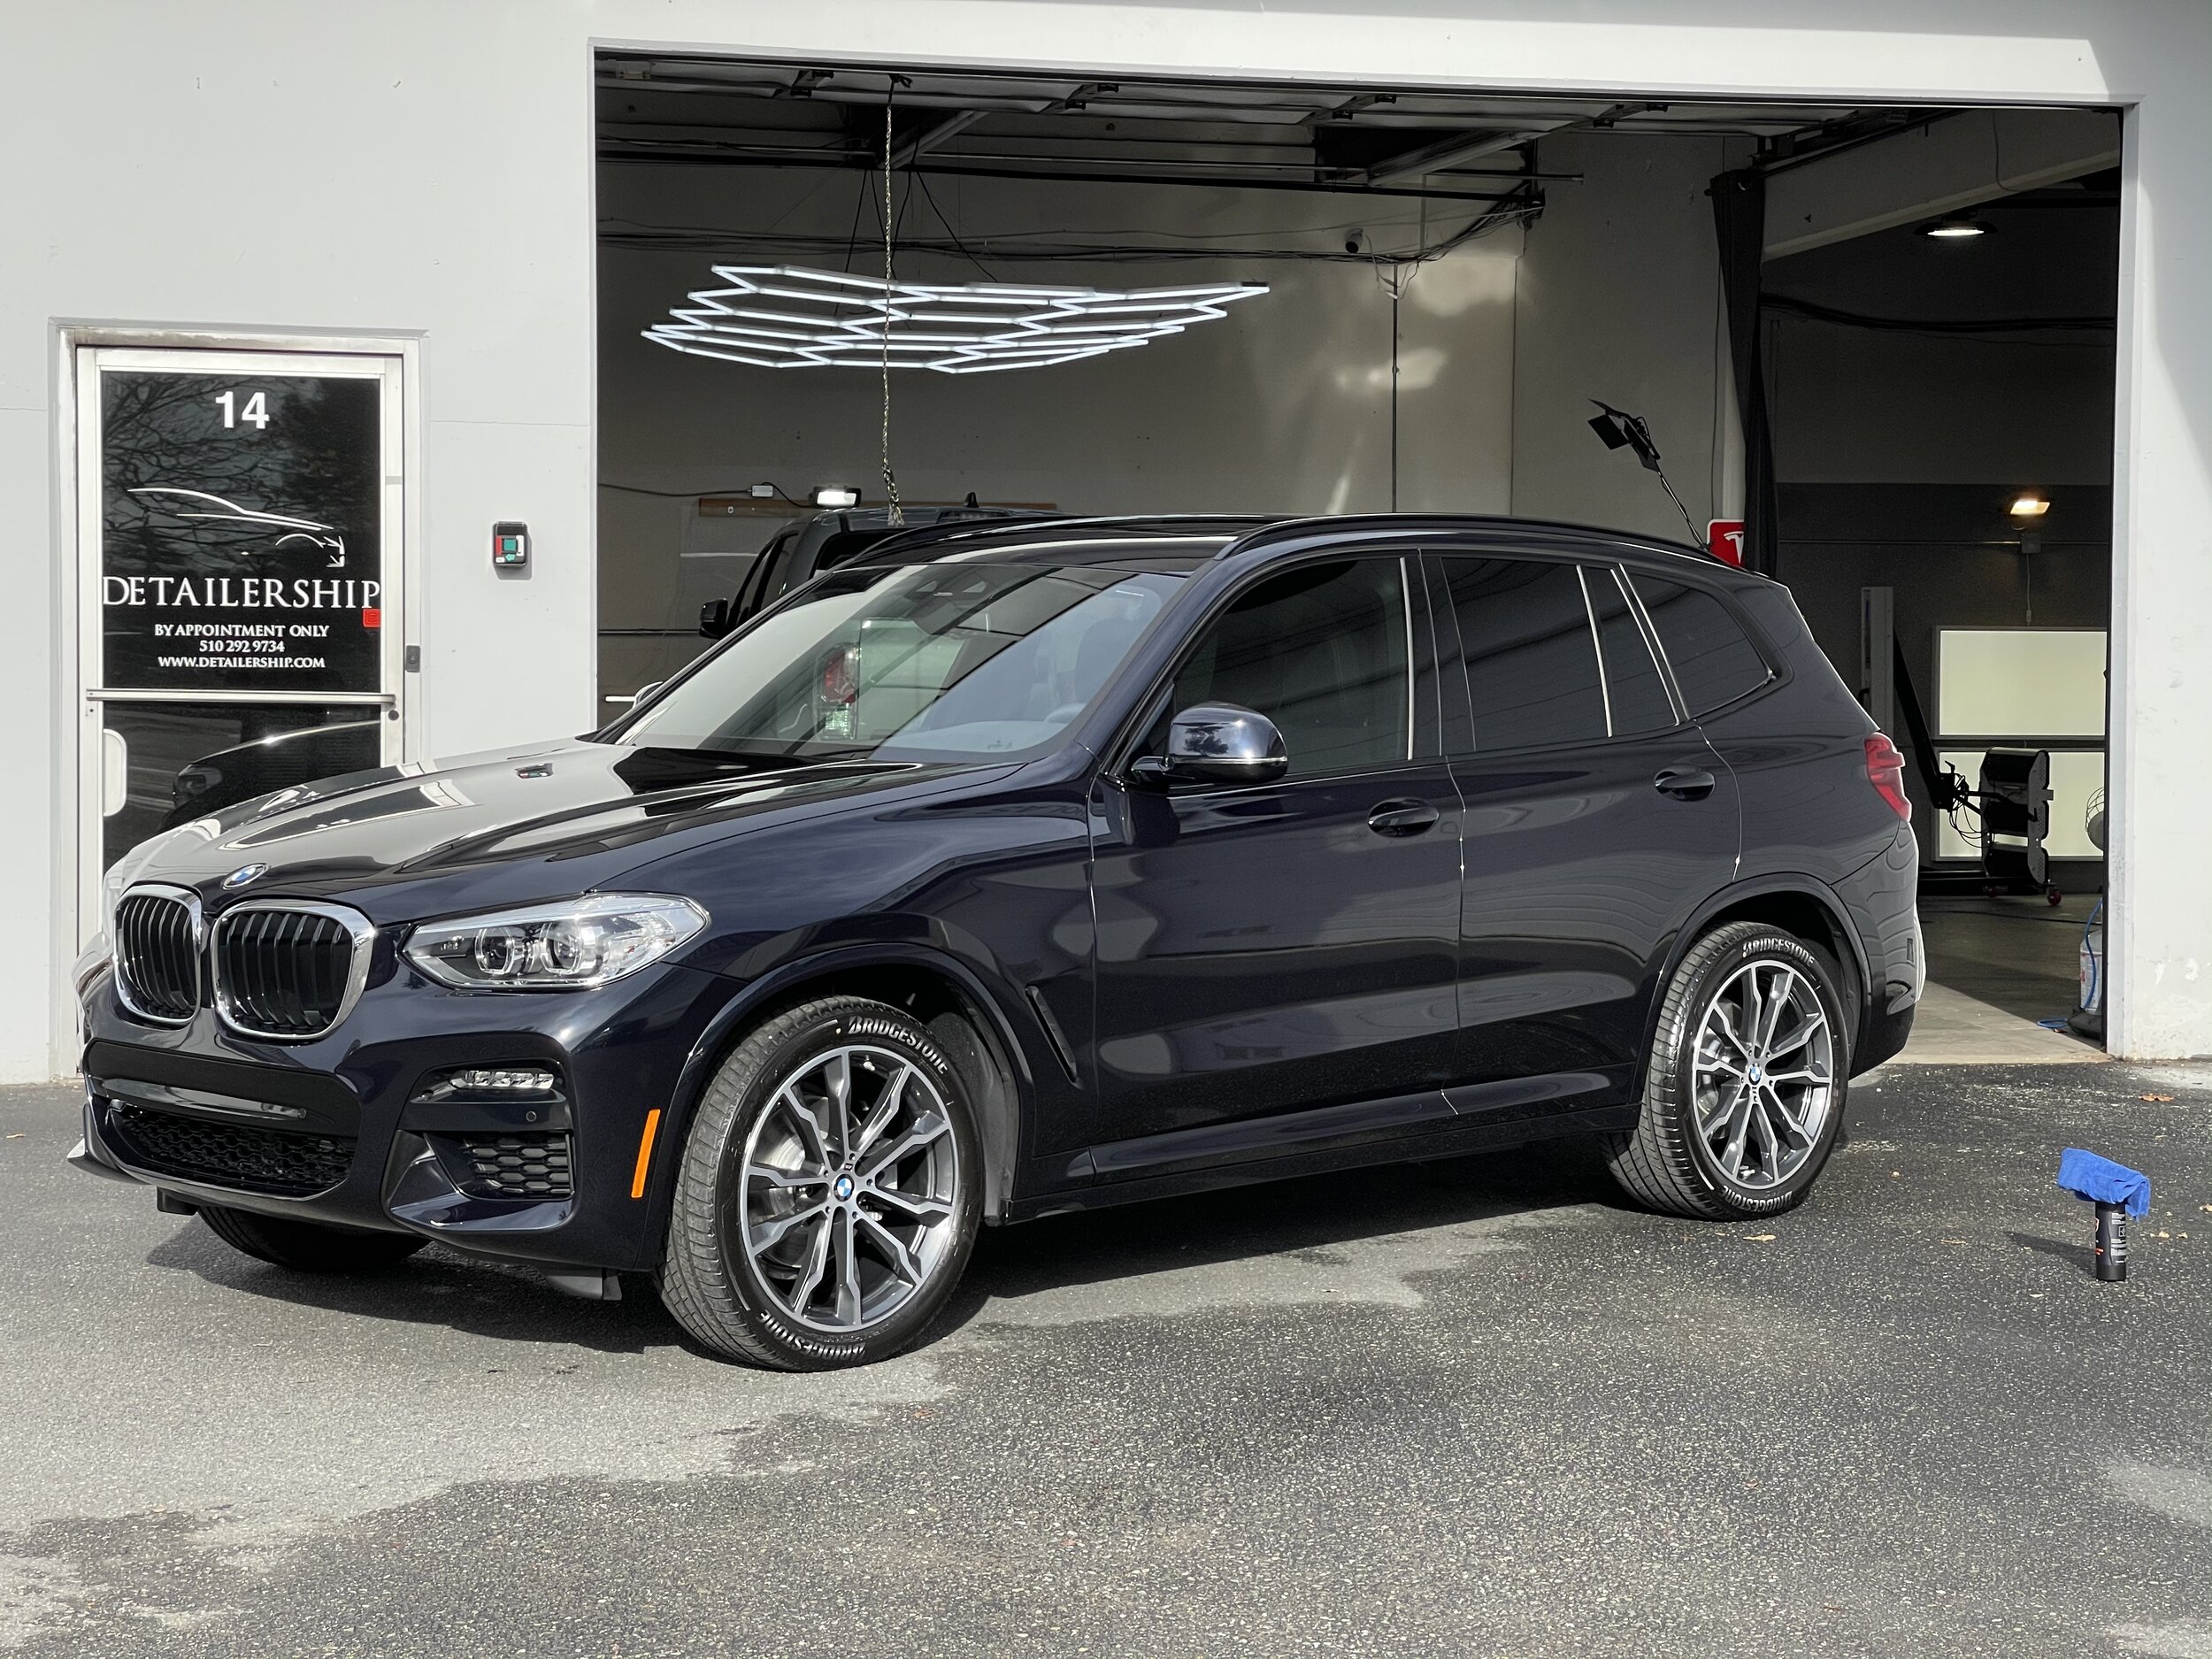 efficiently Play computer games Momentum 2020 BMW X3 (Carbon Black) — DETAILERSHIP™